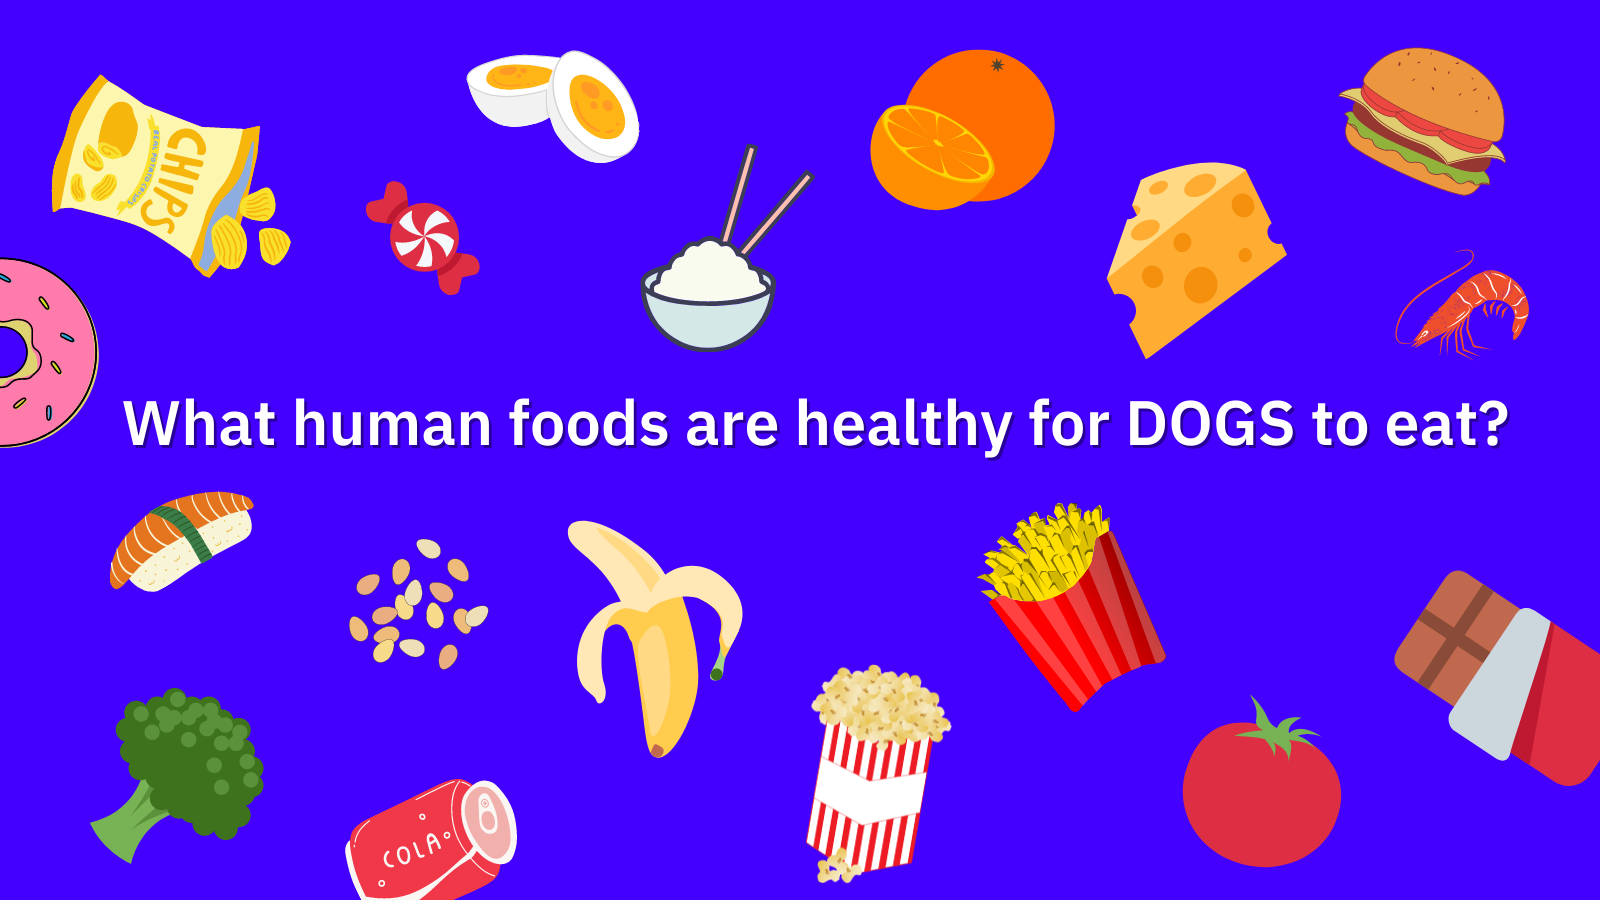 What Human Foods are Healthy for Dogs to Eat?